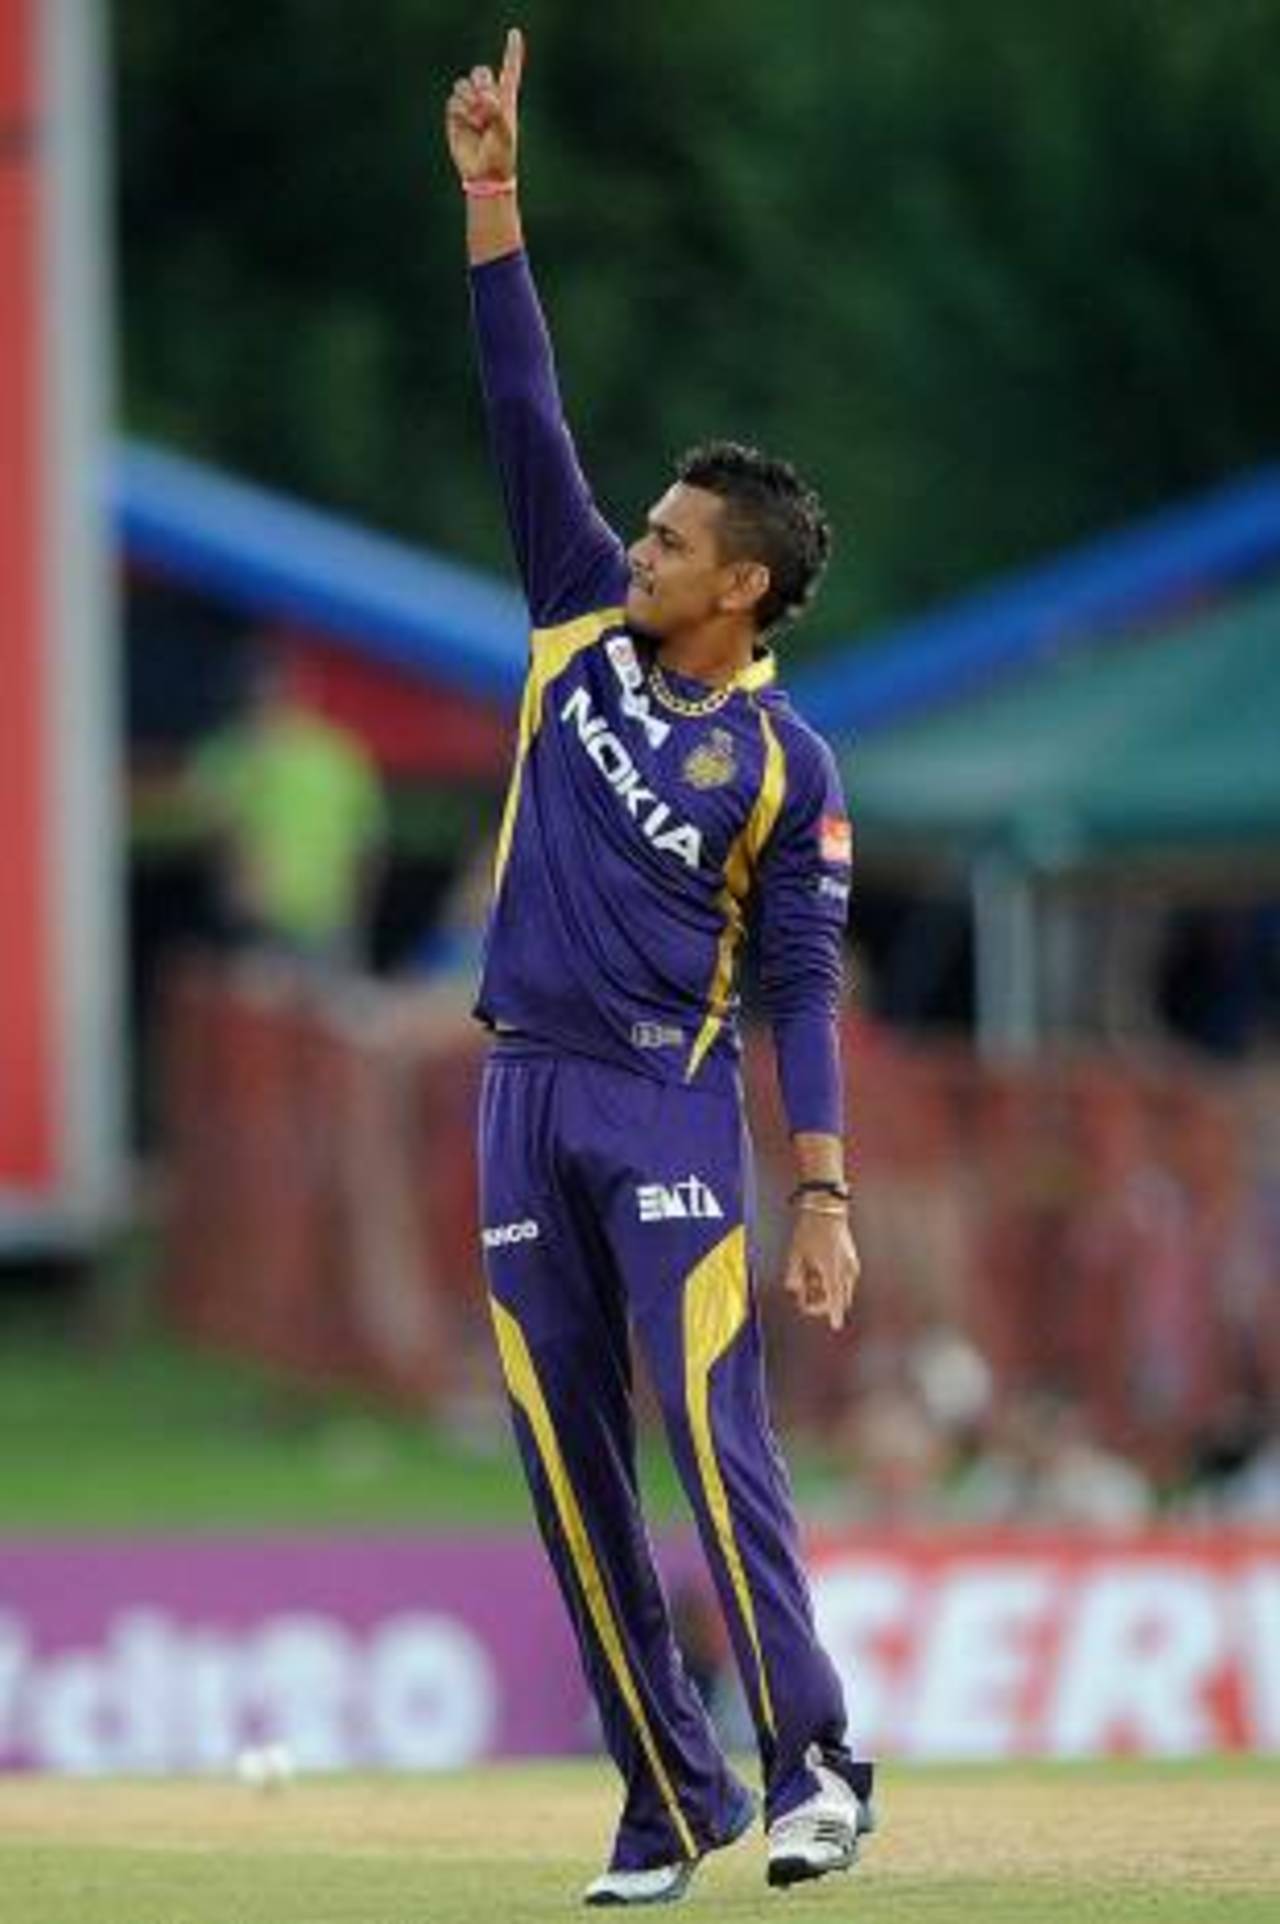 Bags of wickets in the Twenty20 leagues have brought Sunil Narine fame, but not Test success&nbsp;&nbsp;&bull;&nbsp;&nbsp;Getty Images